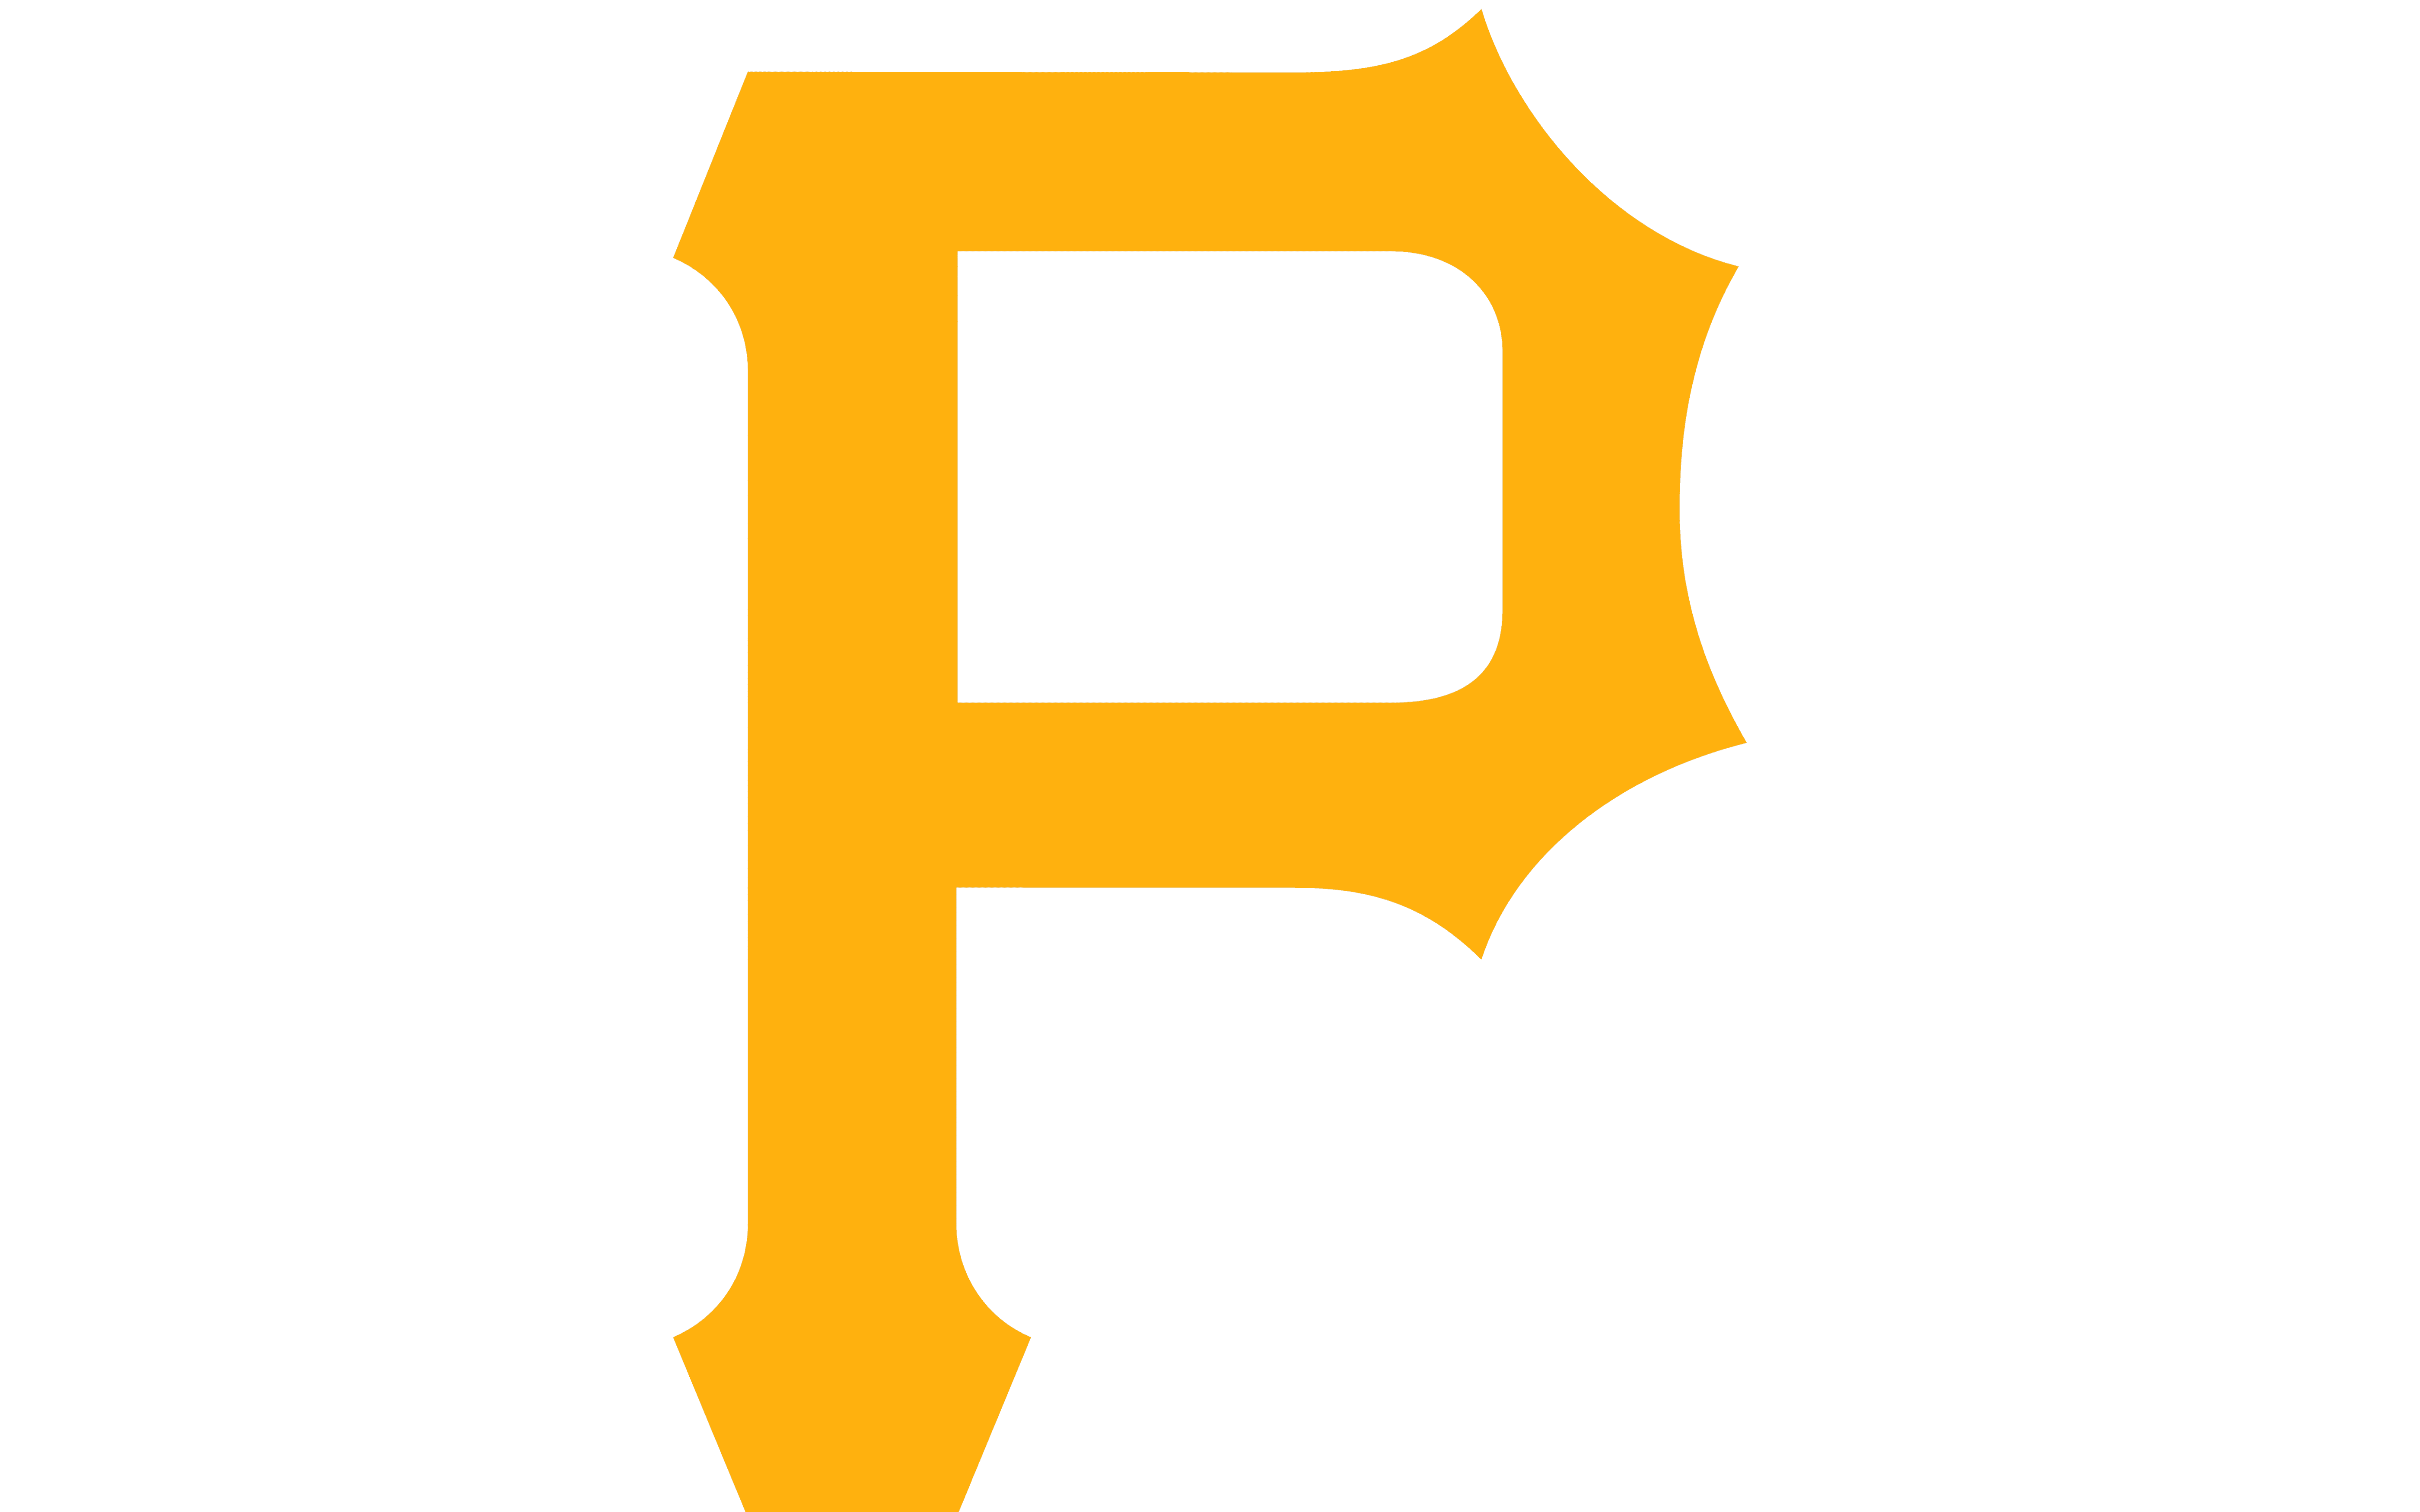 Pittsburgh Pirates Logo and symbol, meaning, history, PNG, brand